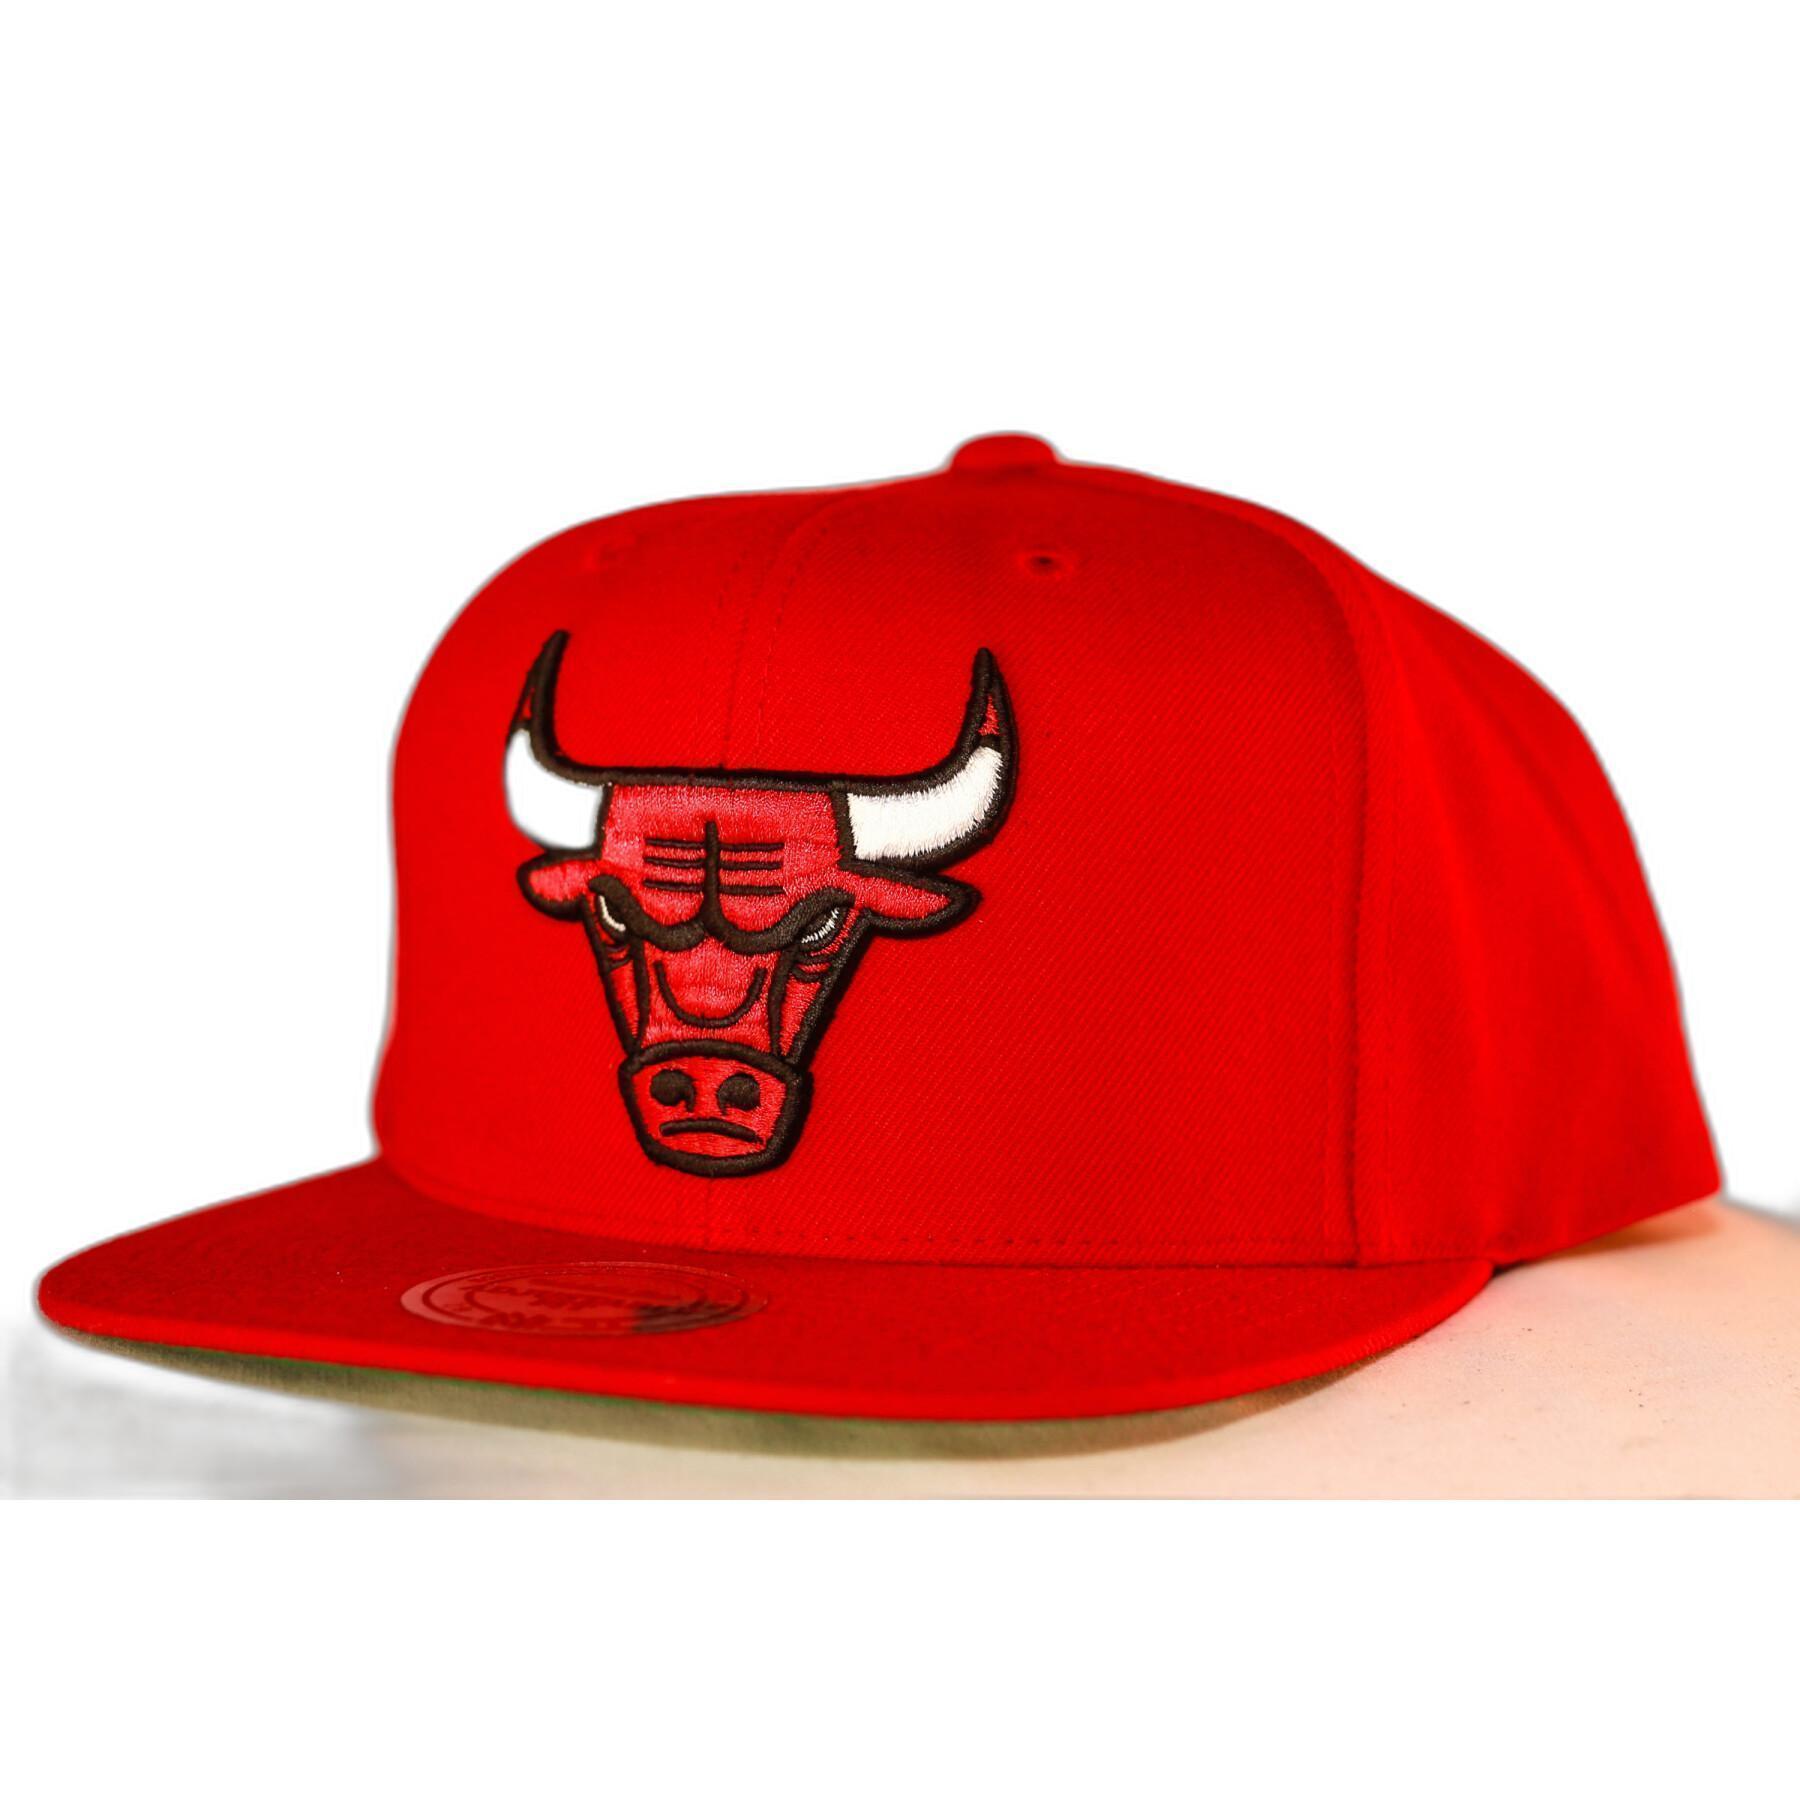 Casquette Chicago Bulls wool solid